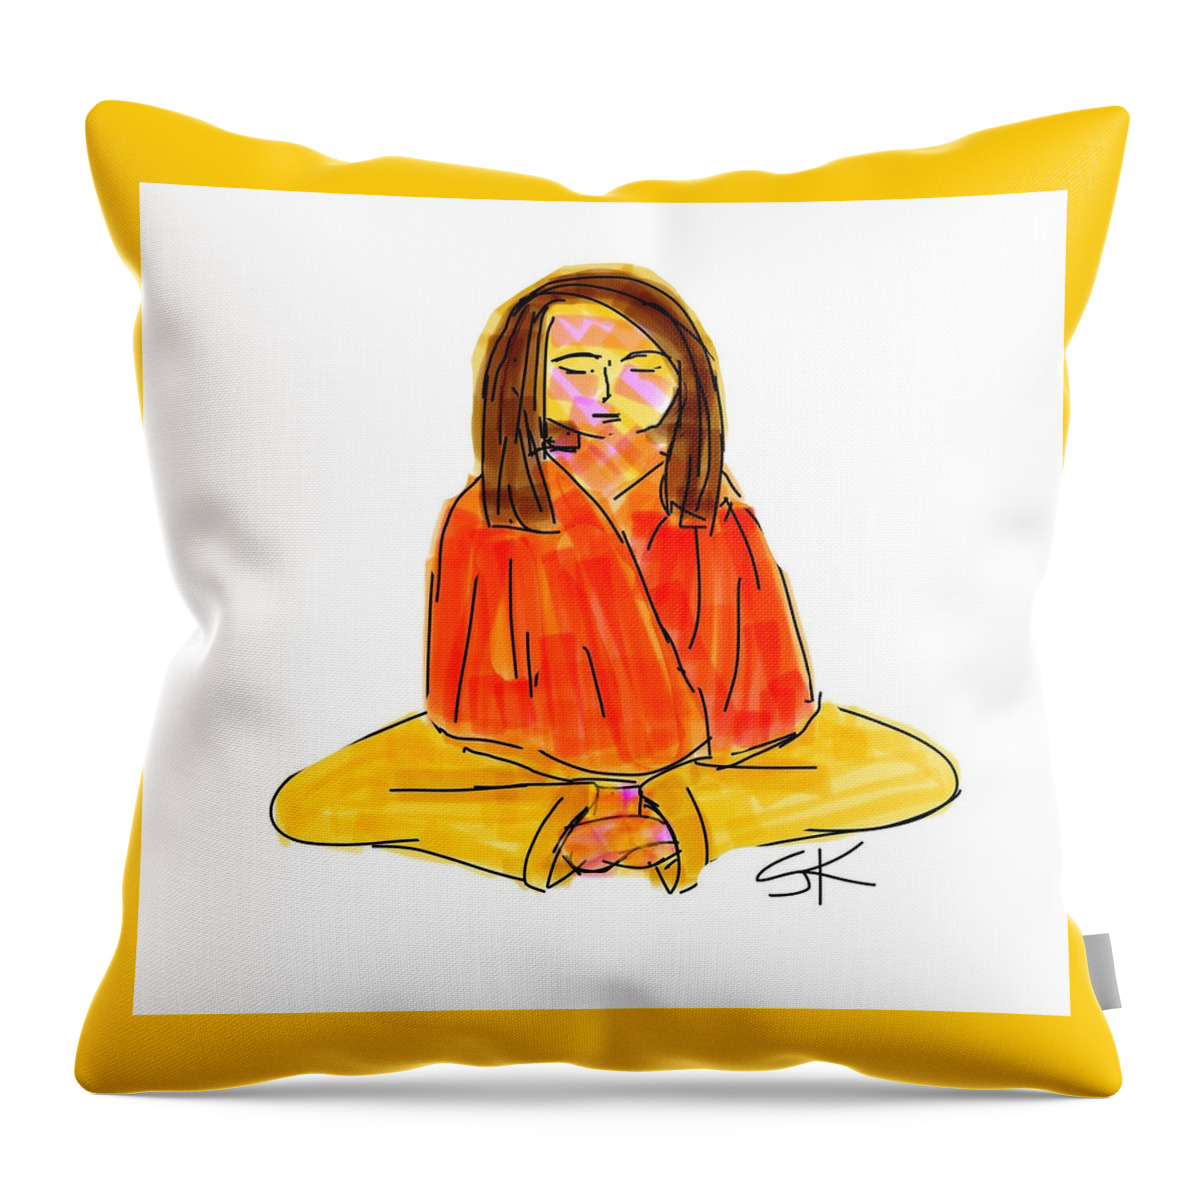 Woman Throw Pillow featuring the digital art Lotus Woman by Sherry Killam